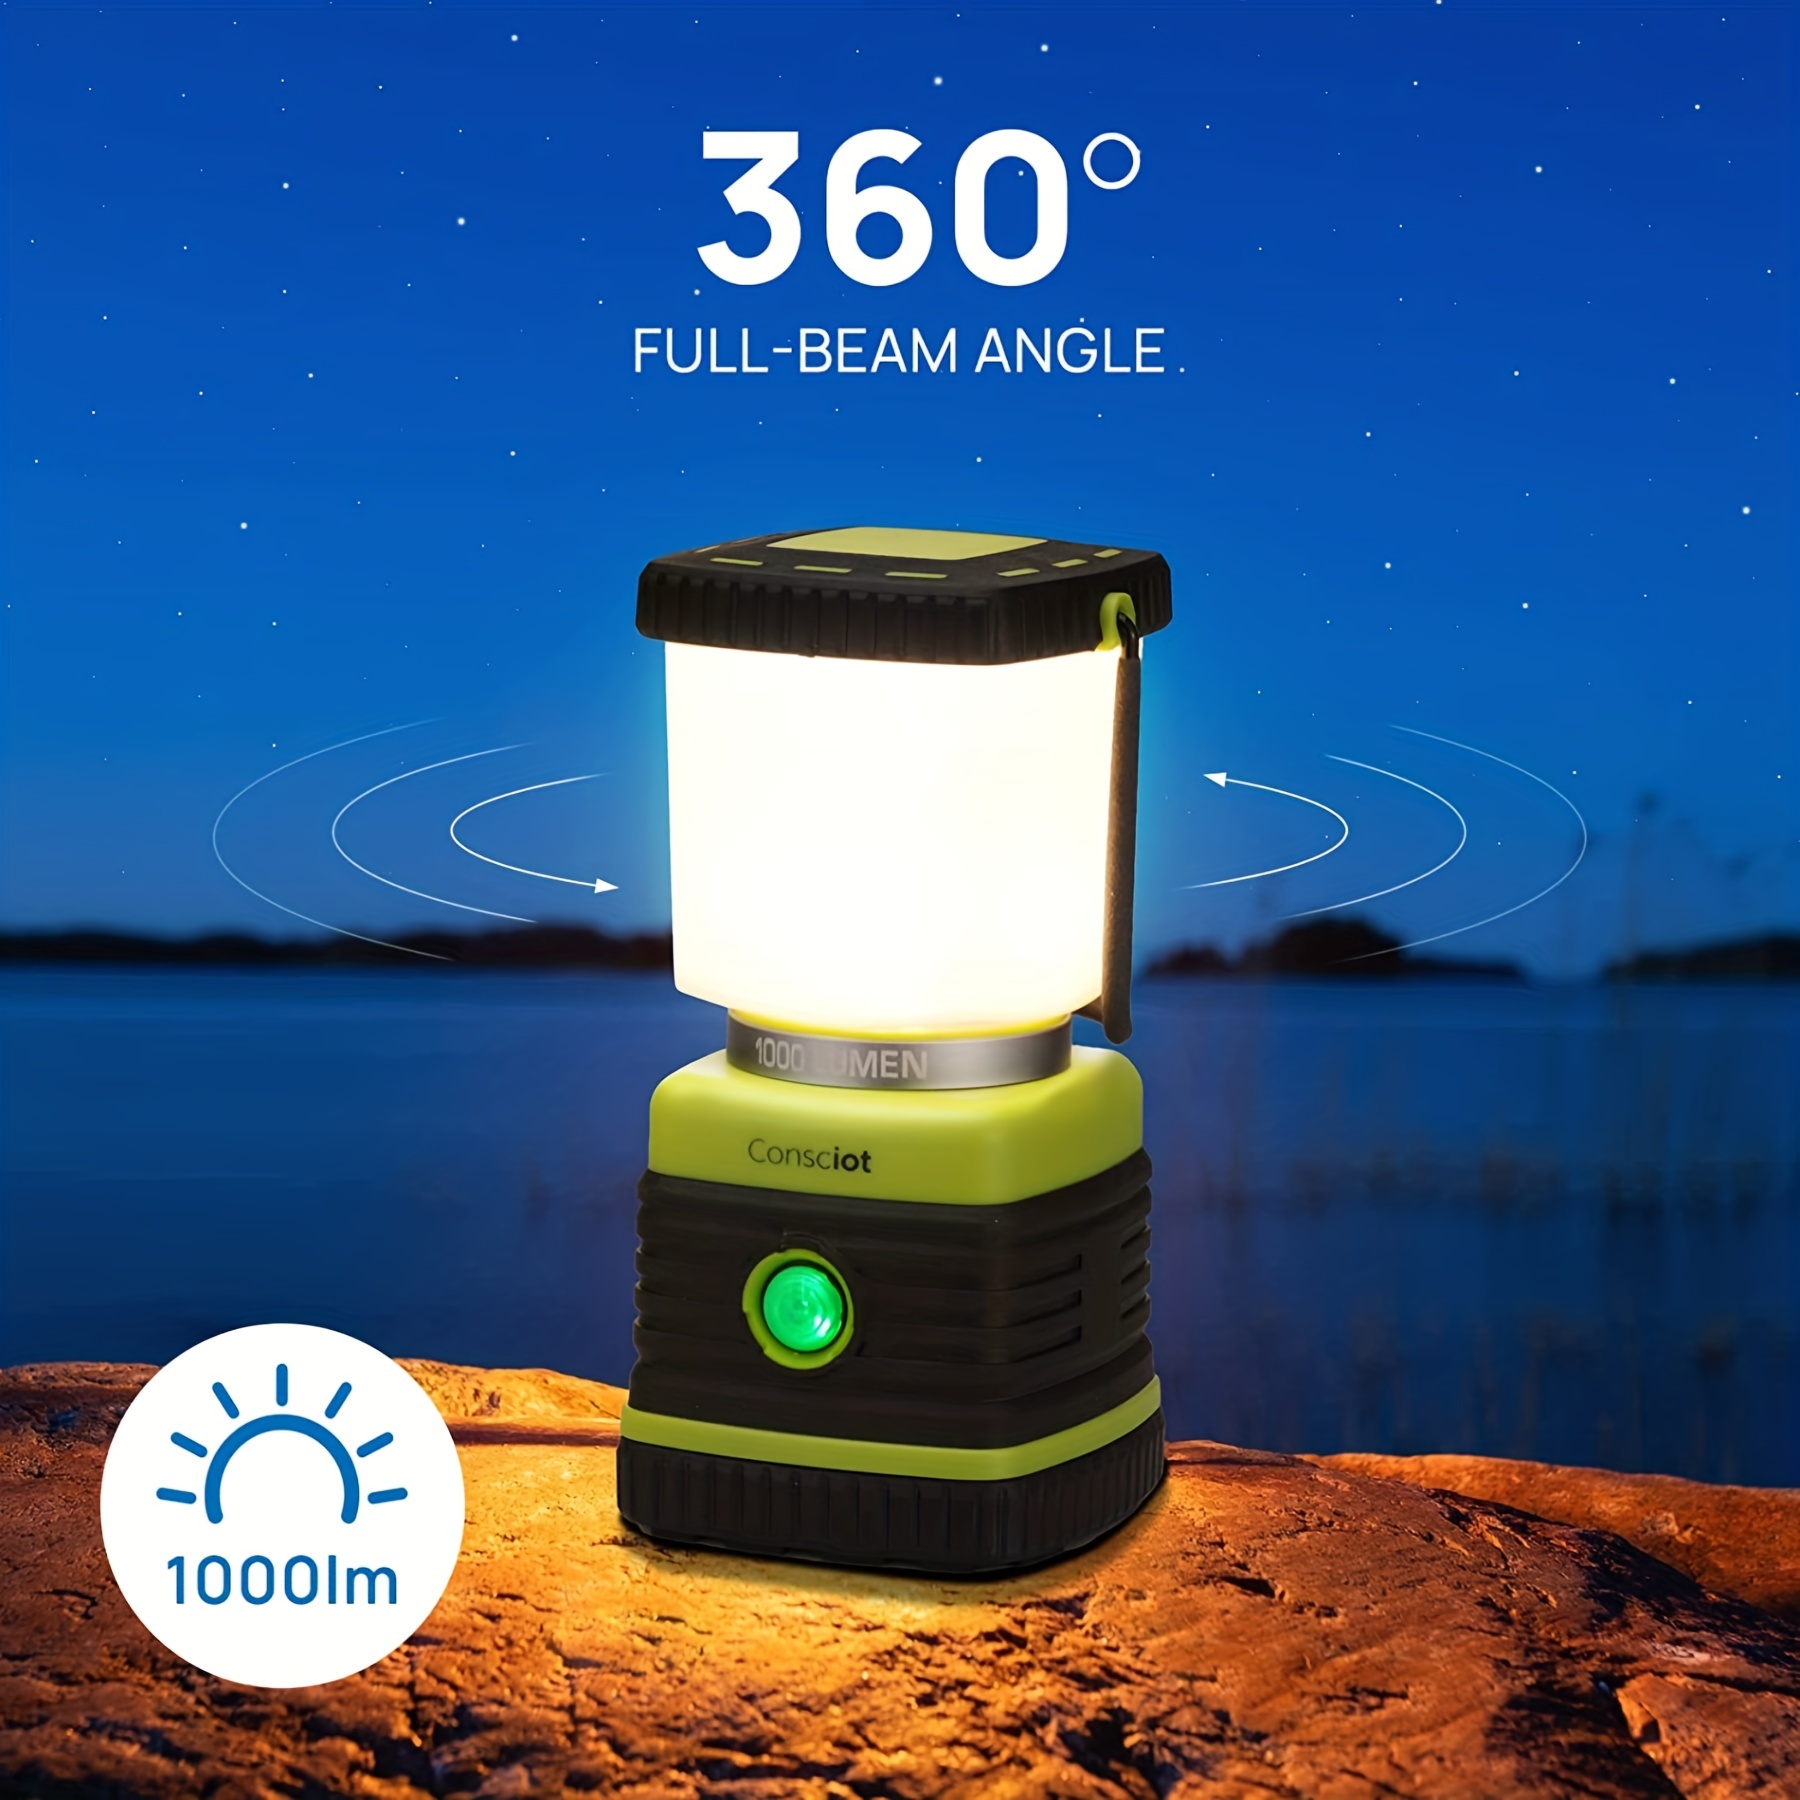 LE LED Camping Lantern, Battery Powered LED with 1000LM, 4 Light Modes,  Waterproof Tent Light, Perfect Lantern Flashlight for Hurricane, Emergency